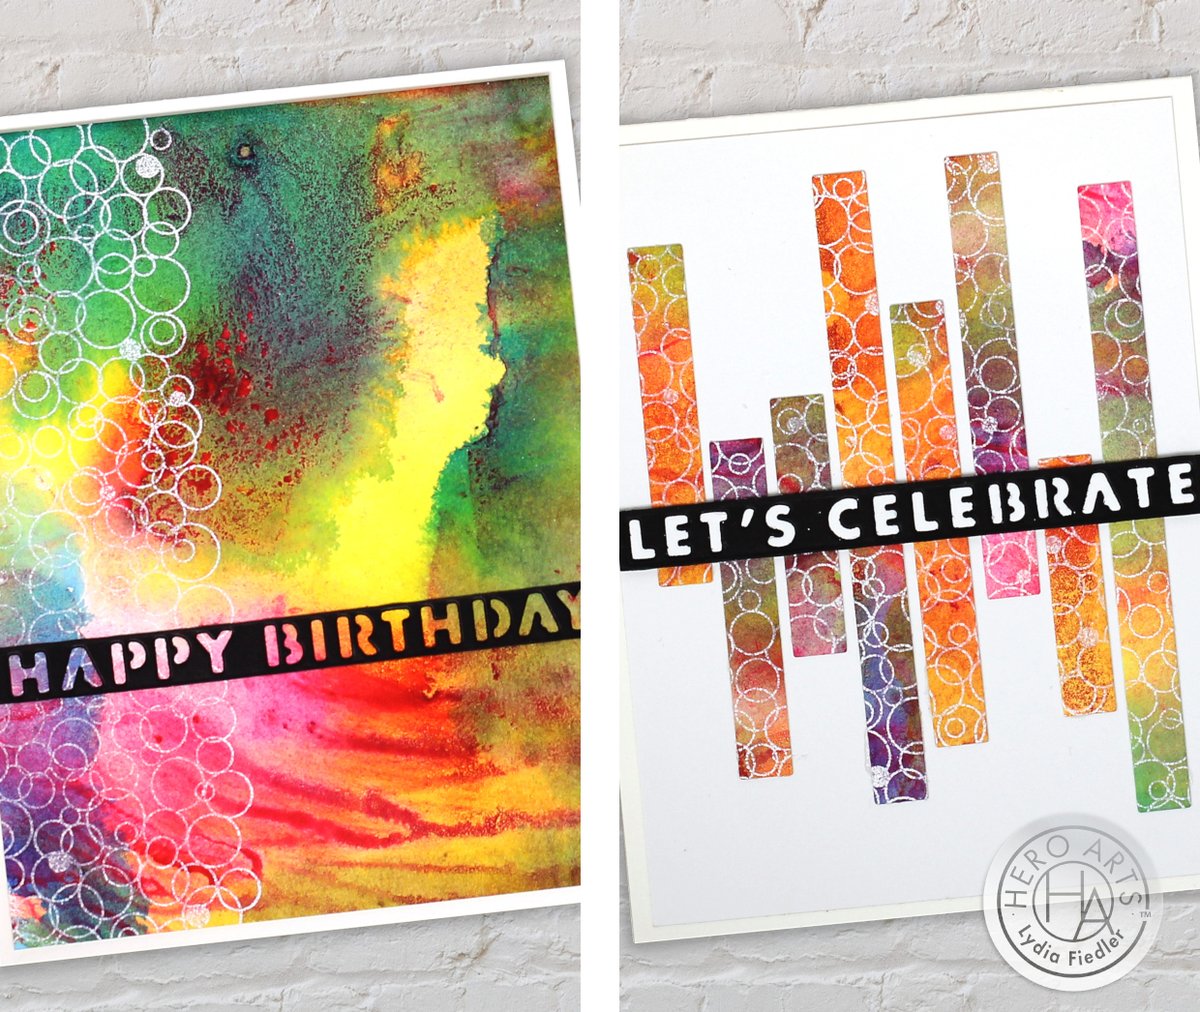 Time for a video and some bubbly mixed media fun! Watch as Lydia introduces our new Bubble Celebration Bold Prints background stamp to the Liquid Watercolor 'smoosh' treatment: heroarts.com/blogs/hero-art…